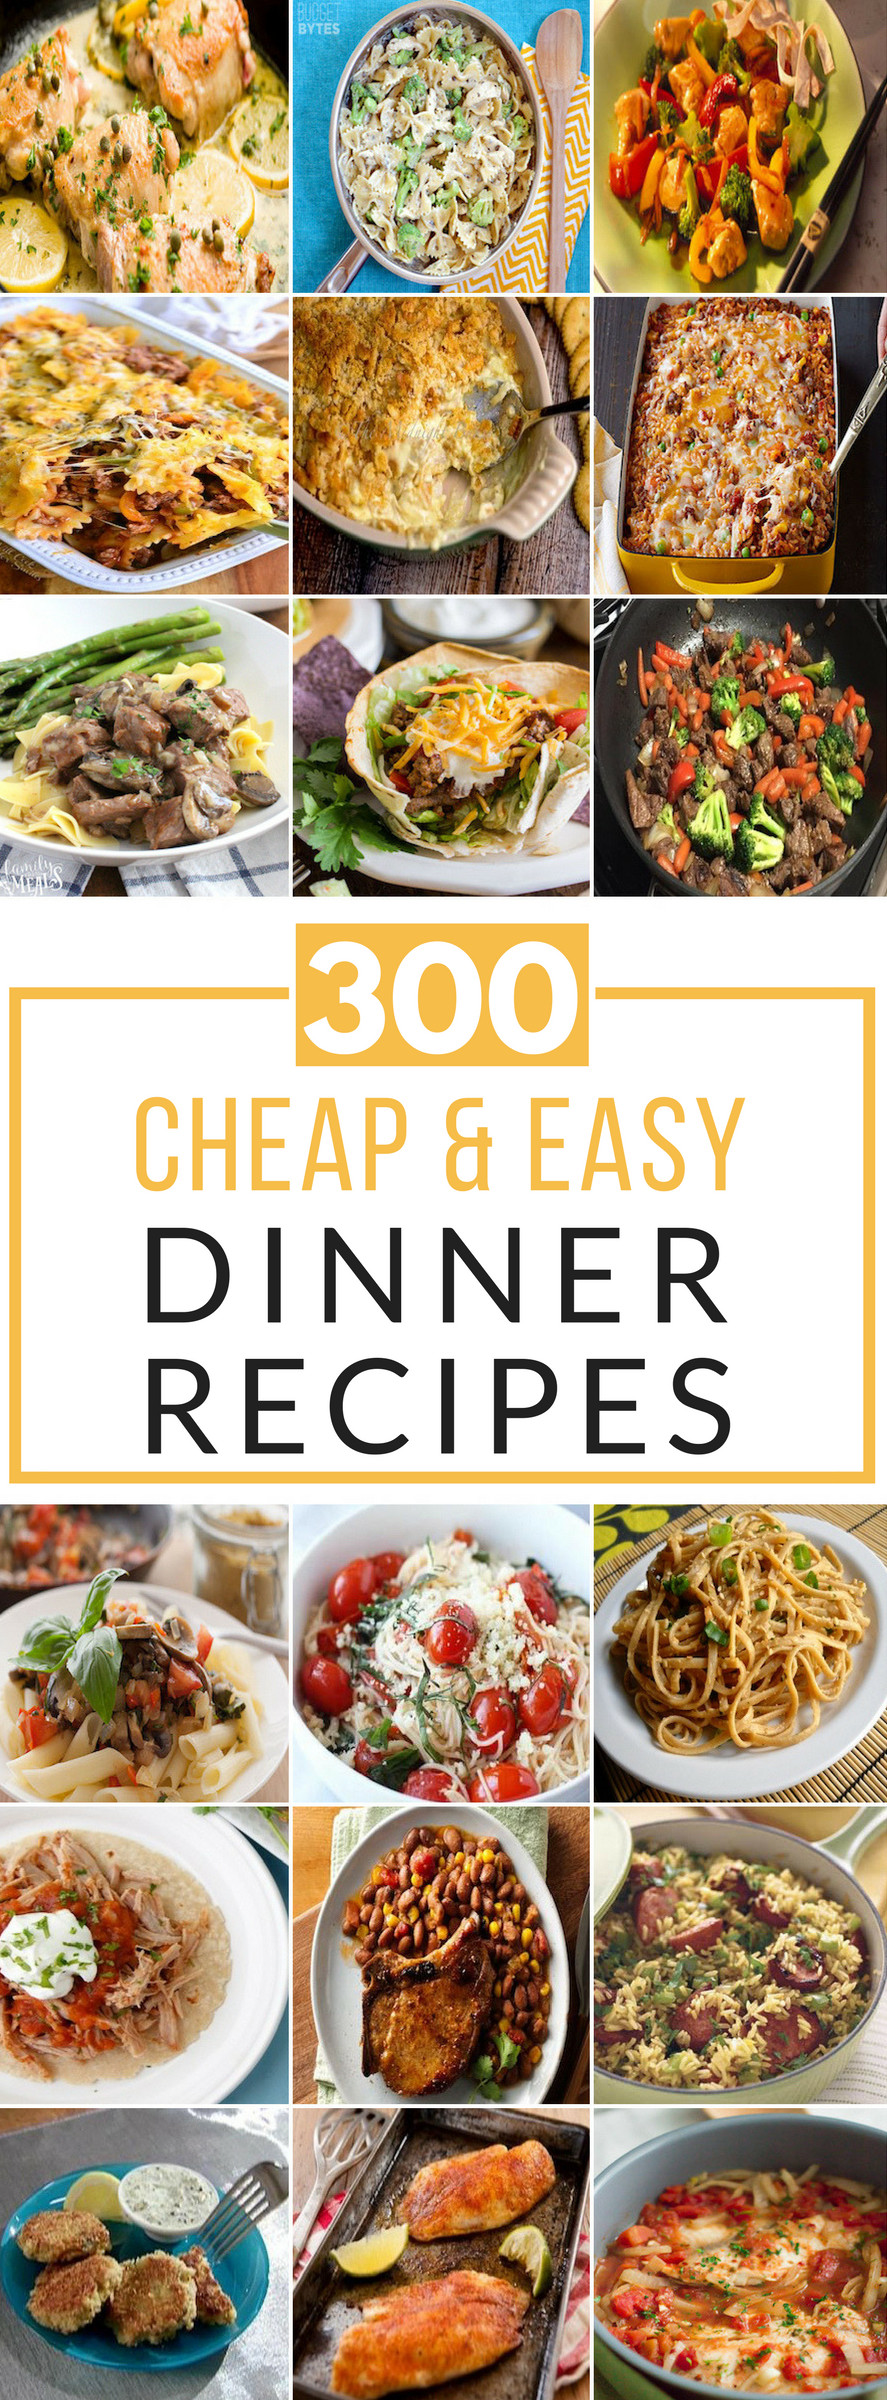 Easy And Cheap Dinner Ideas
 300 Cheap and Easy Dinner Recipes Prudent Penny Pincher